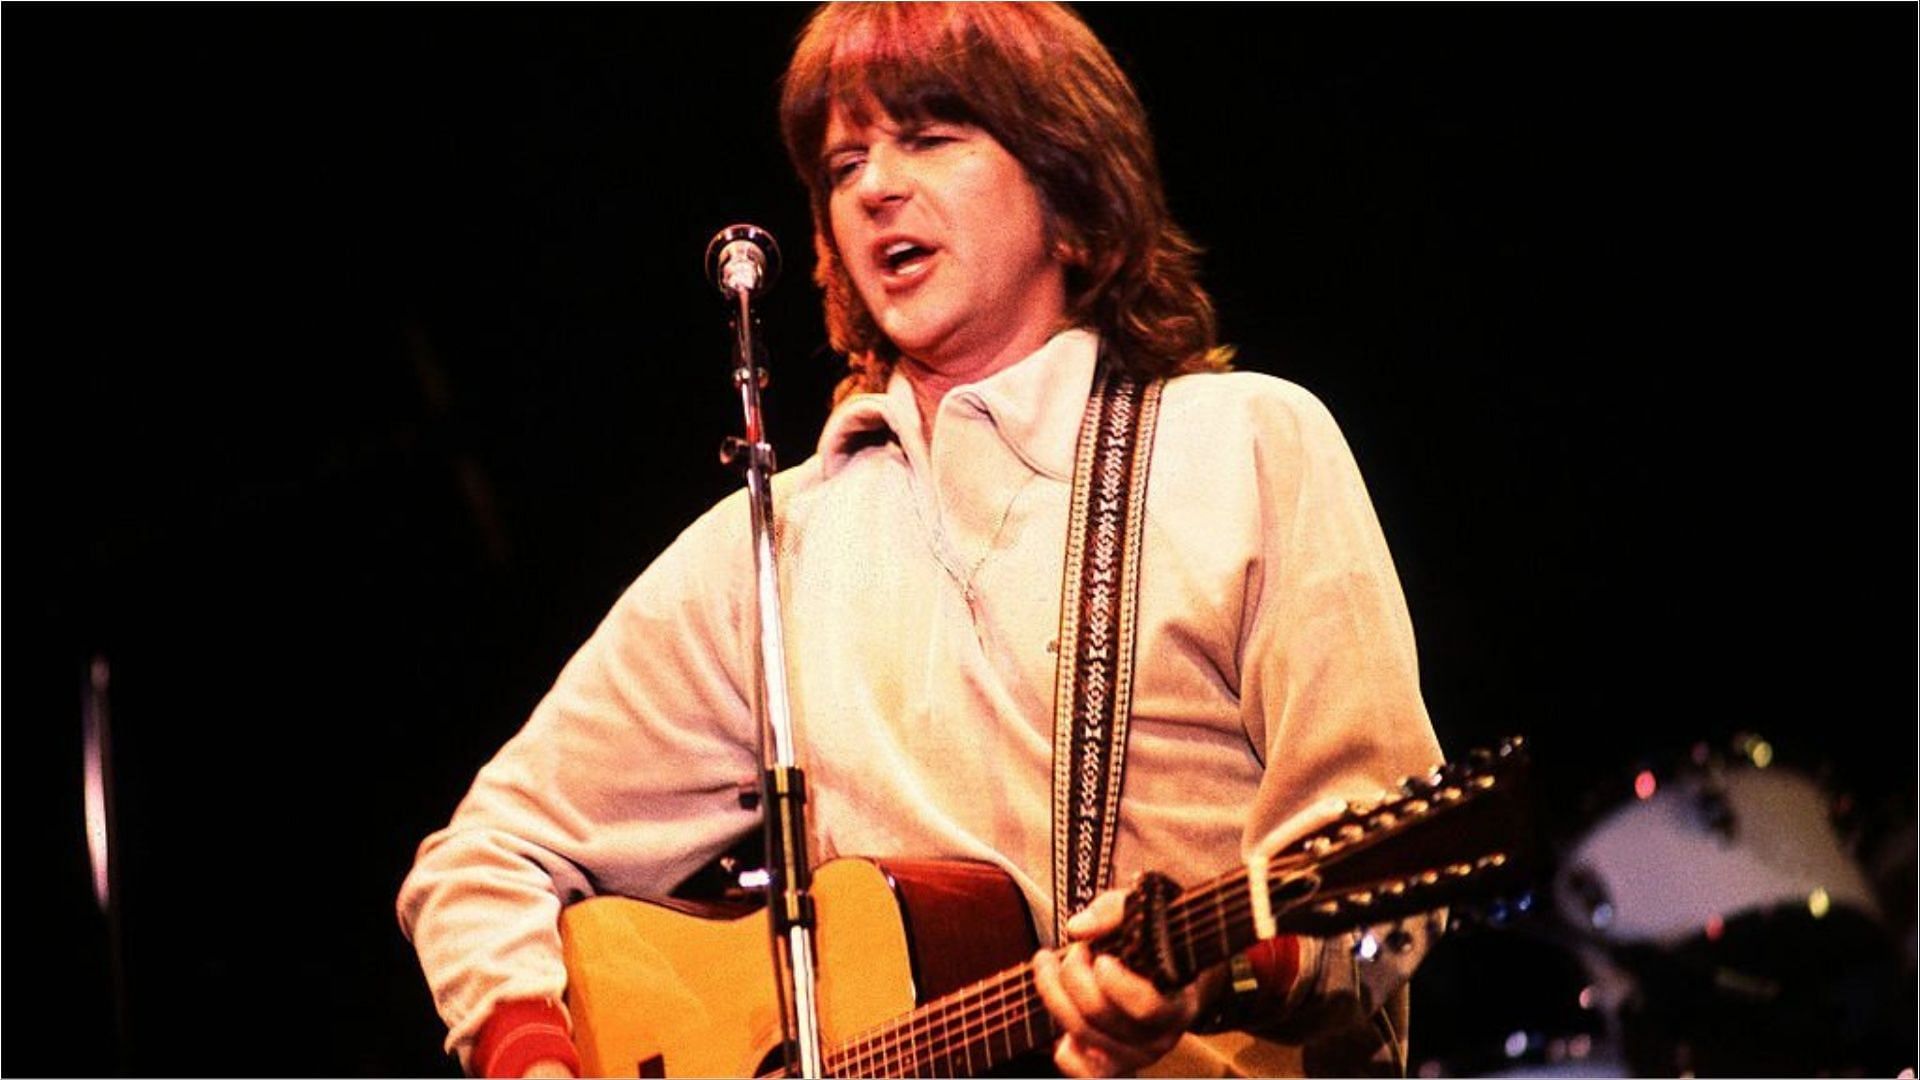 Randy Meisner recently died at the age of 77 (Image via Paul Natkin/Getty Images)